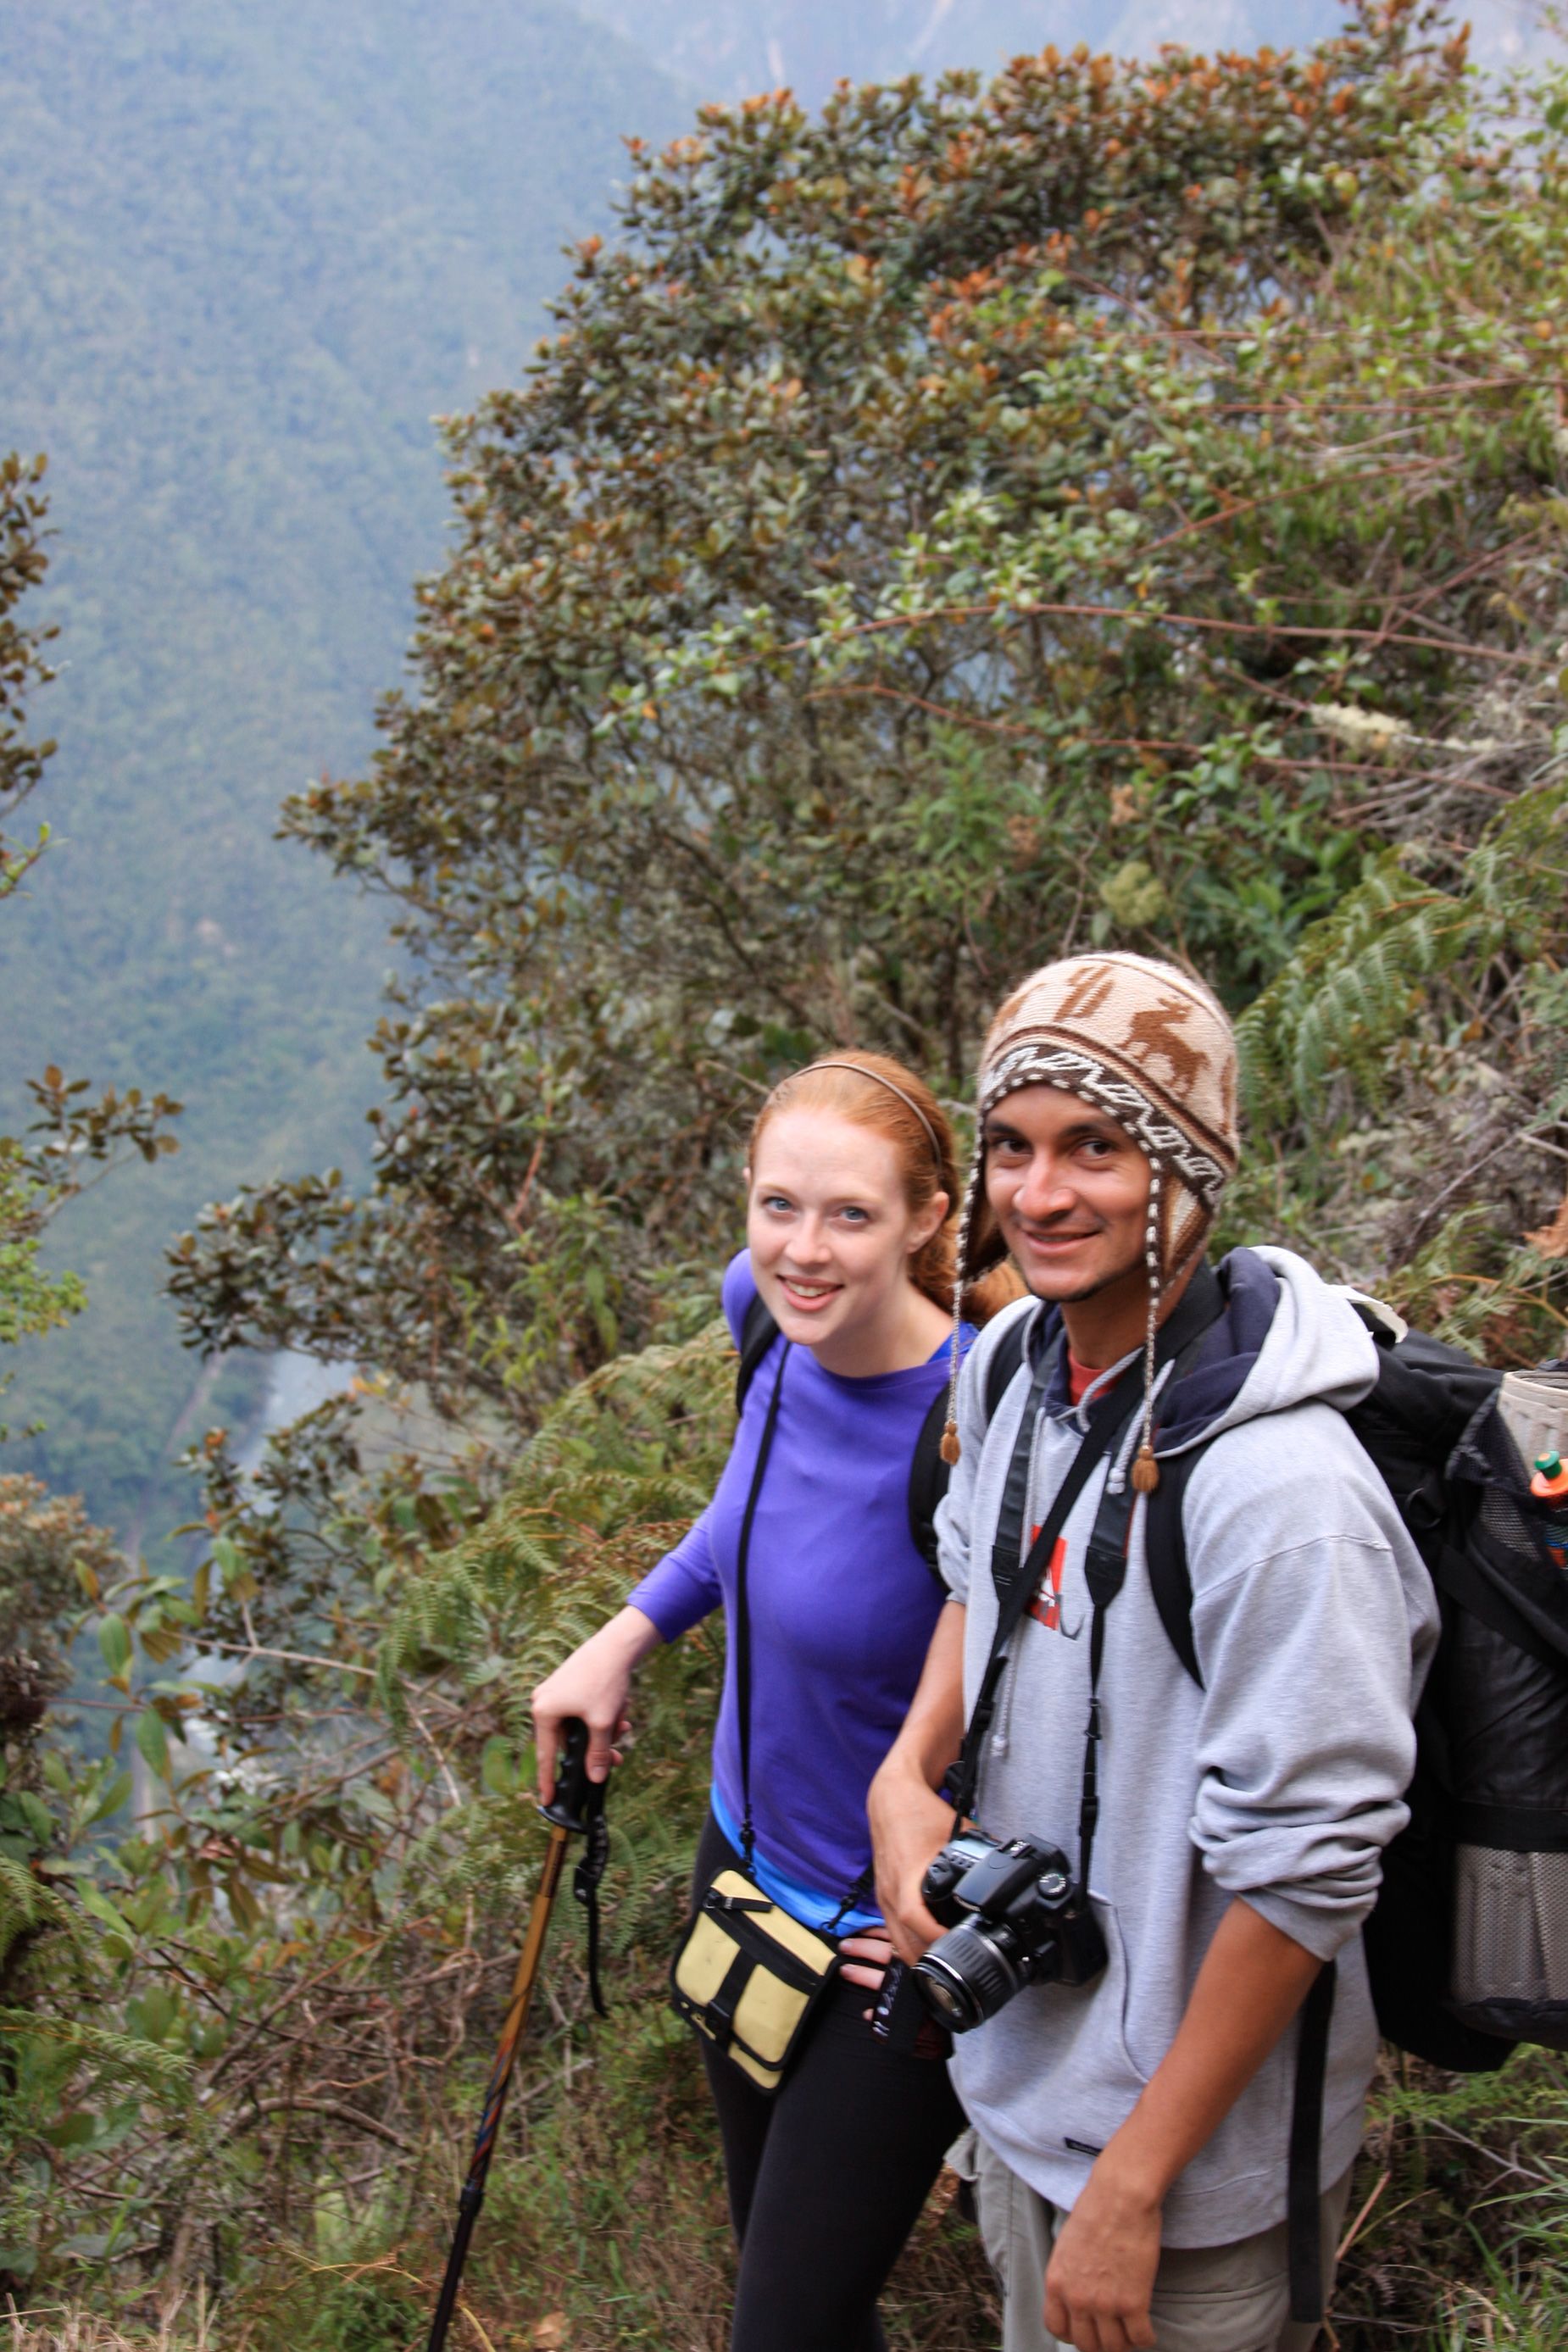 Laura and Adrian on the Inca Trail together.